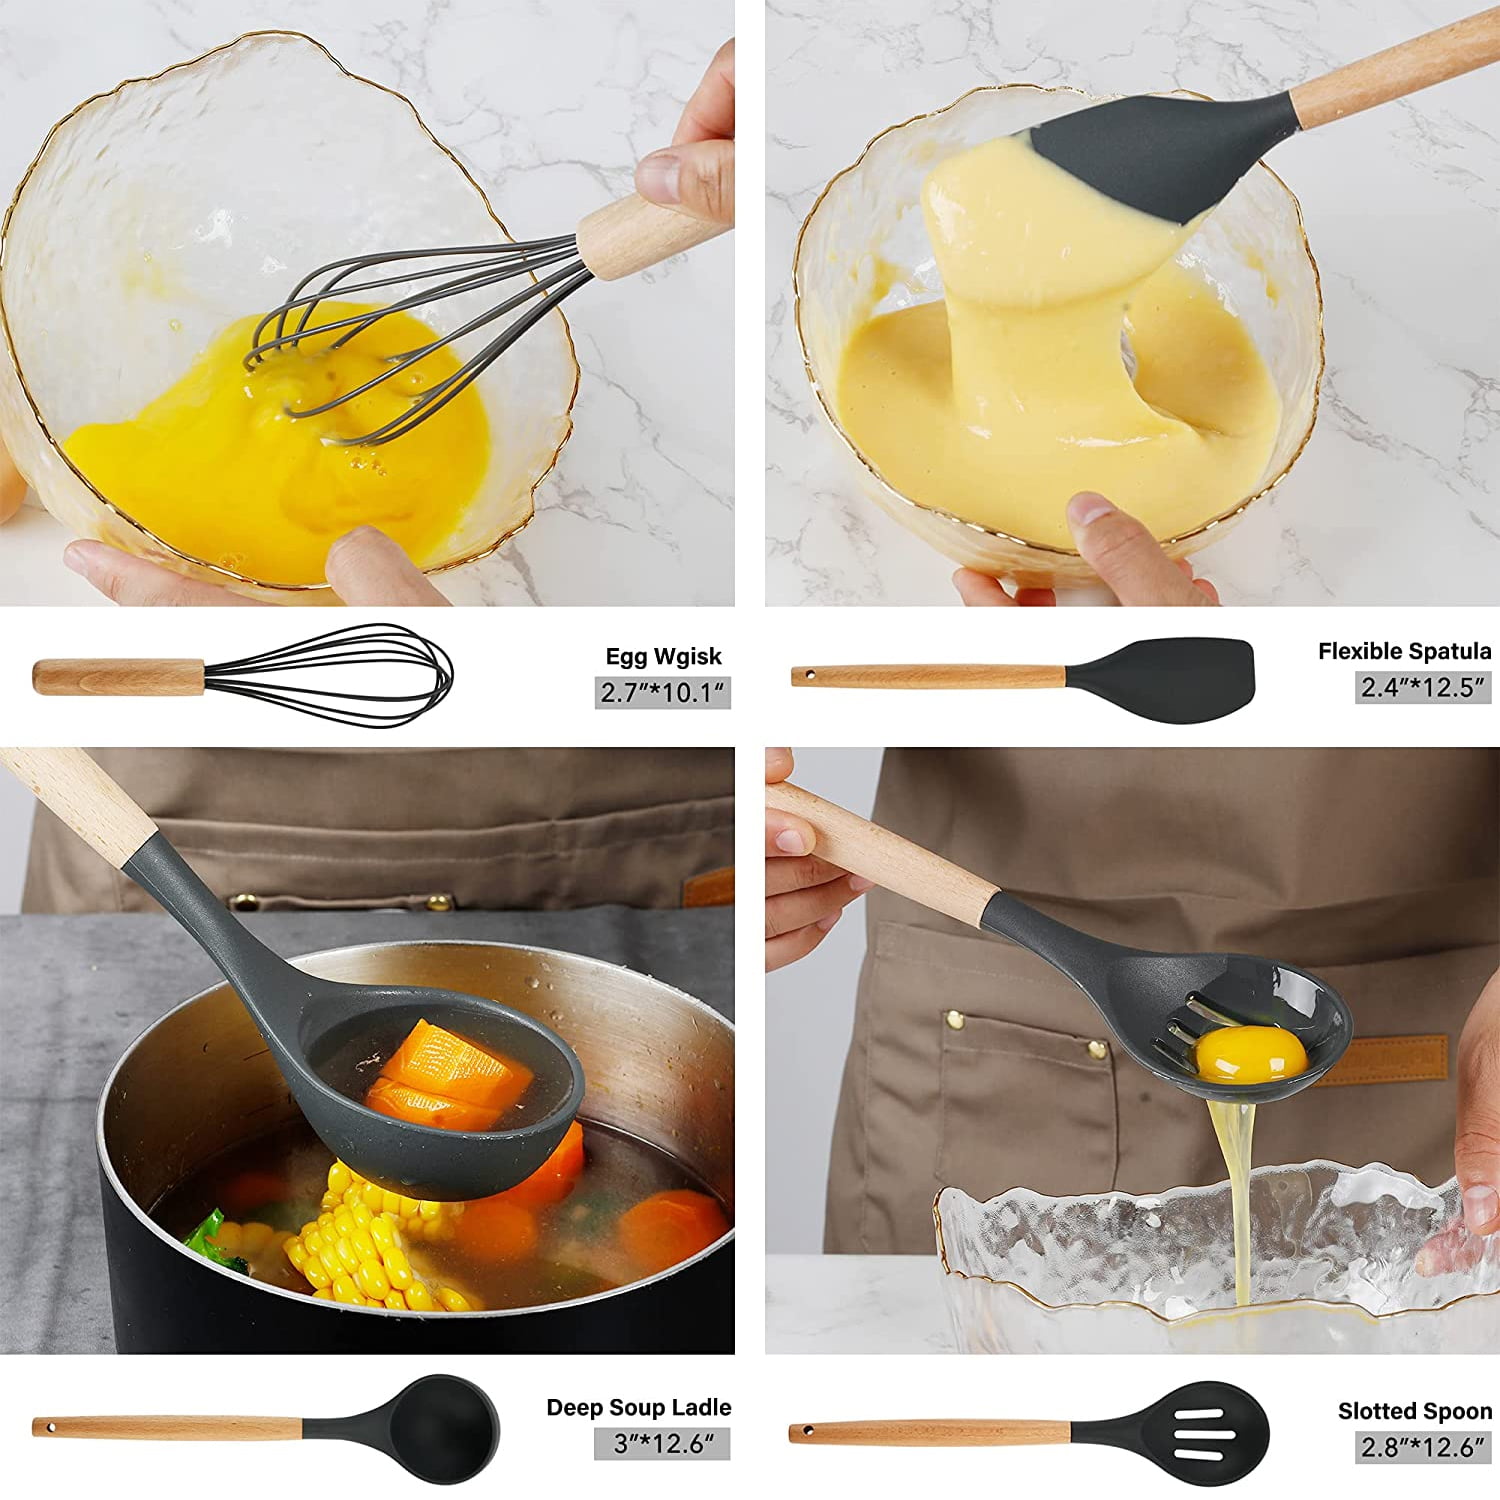 Silicone Cooking Utensils Set - 446°F Heat Resistant Silicone Kitchen  Utensils for Cooking,Kitchen Utensil